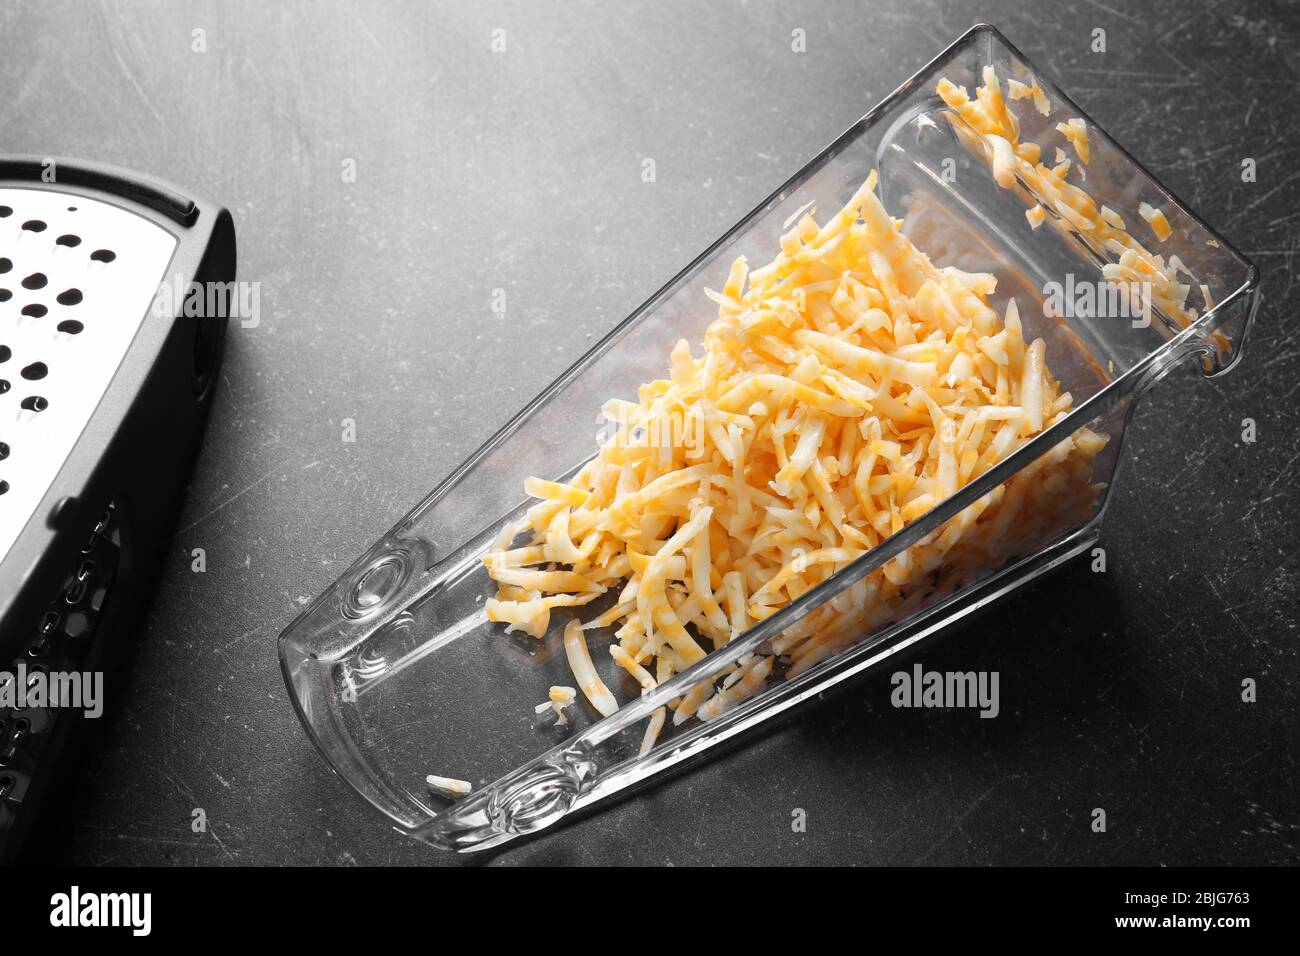 https://c8.alamy.com/comp/2BJG763/grated-cheese-in-plastic-container-on-table-2BJG763.jpg